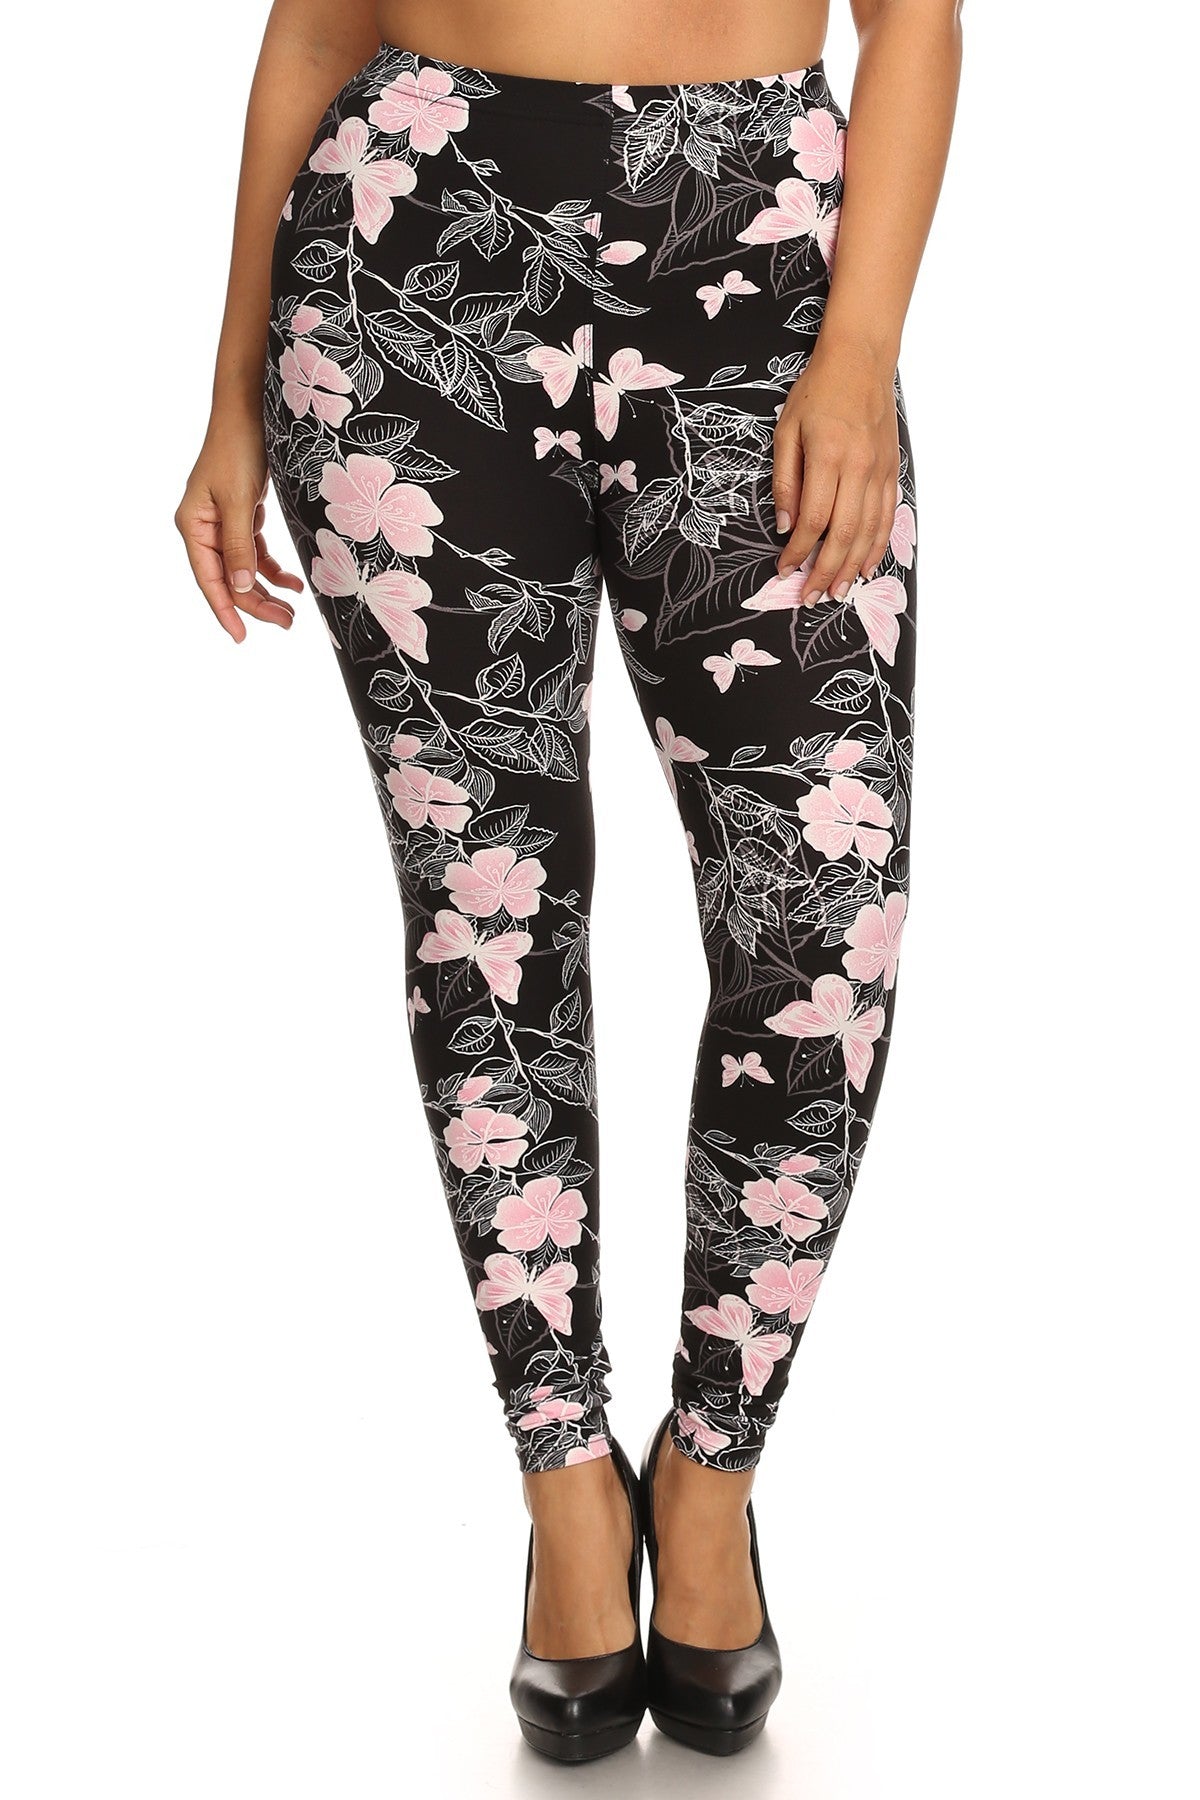 Multi One Size Fits Most - Plus Size Super Soft Peach Skin Fabric, Butterfly Graphic Printed Knit Legging With Elastic Waist Detail - womens leggings at TFC&H Co.